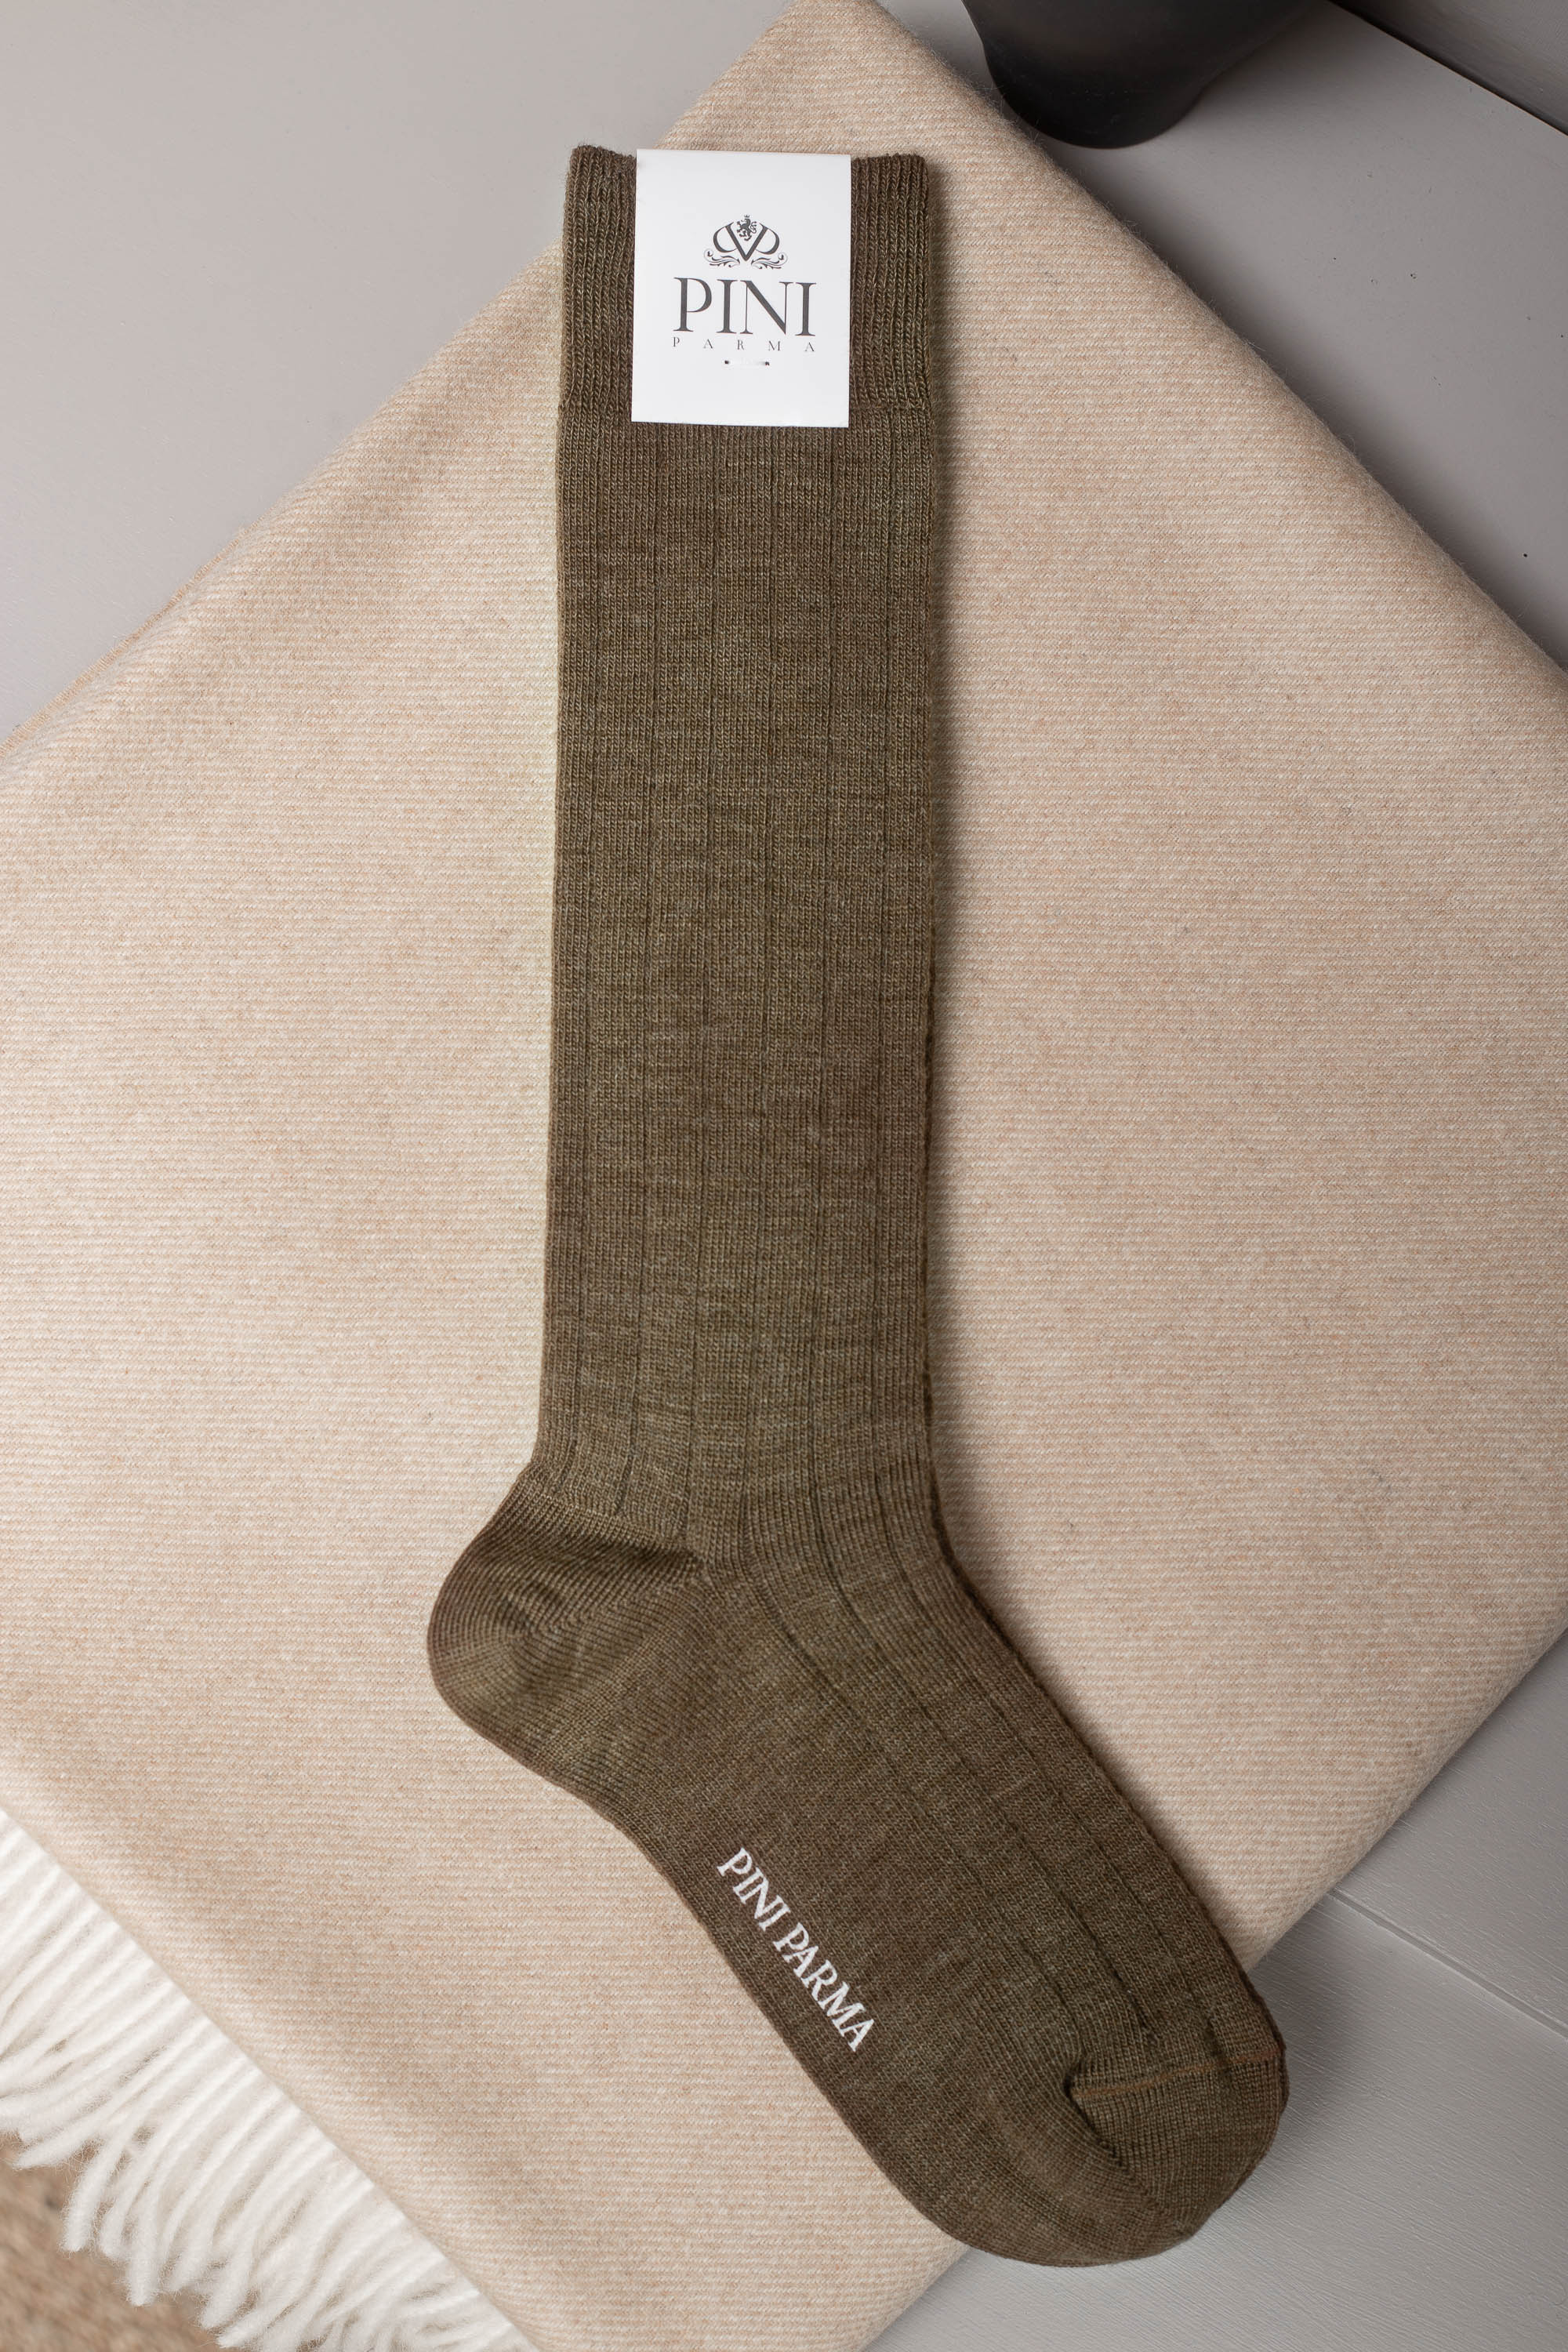 Brown - Super durable Wool short socks - Made in Italy